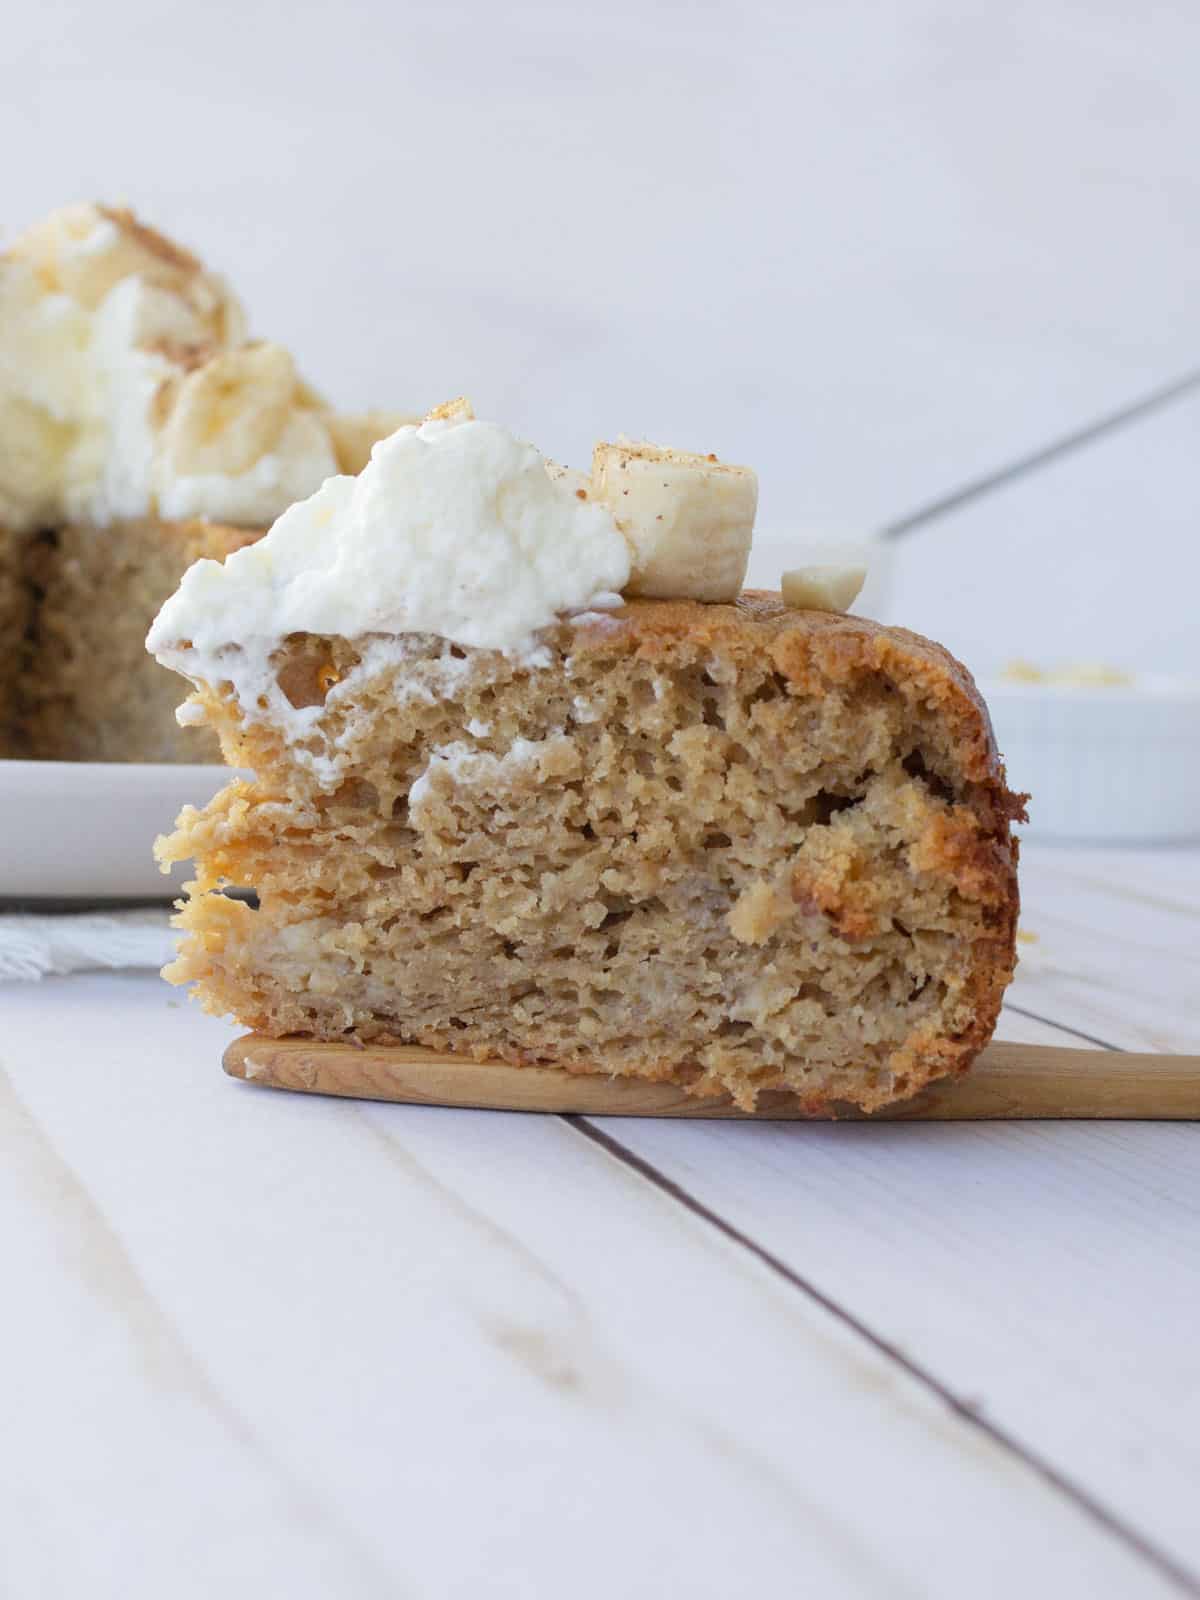 Slice of banana cake on a wood spatula, with whipped cream and bananas on top.